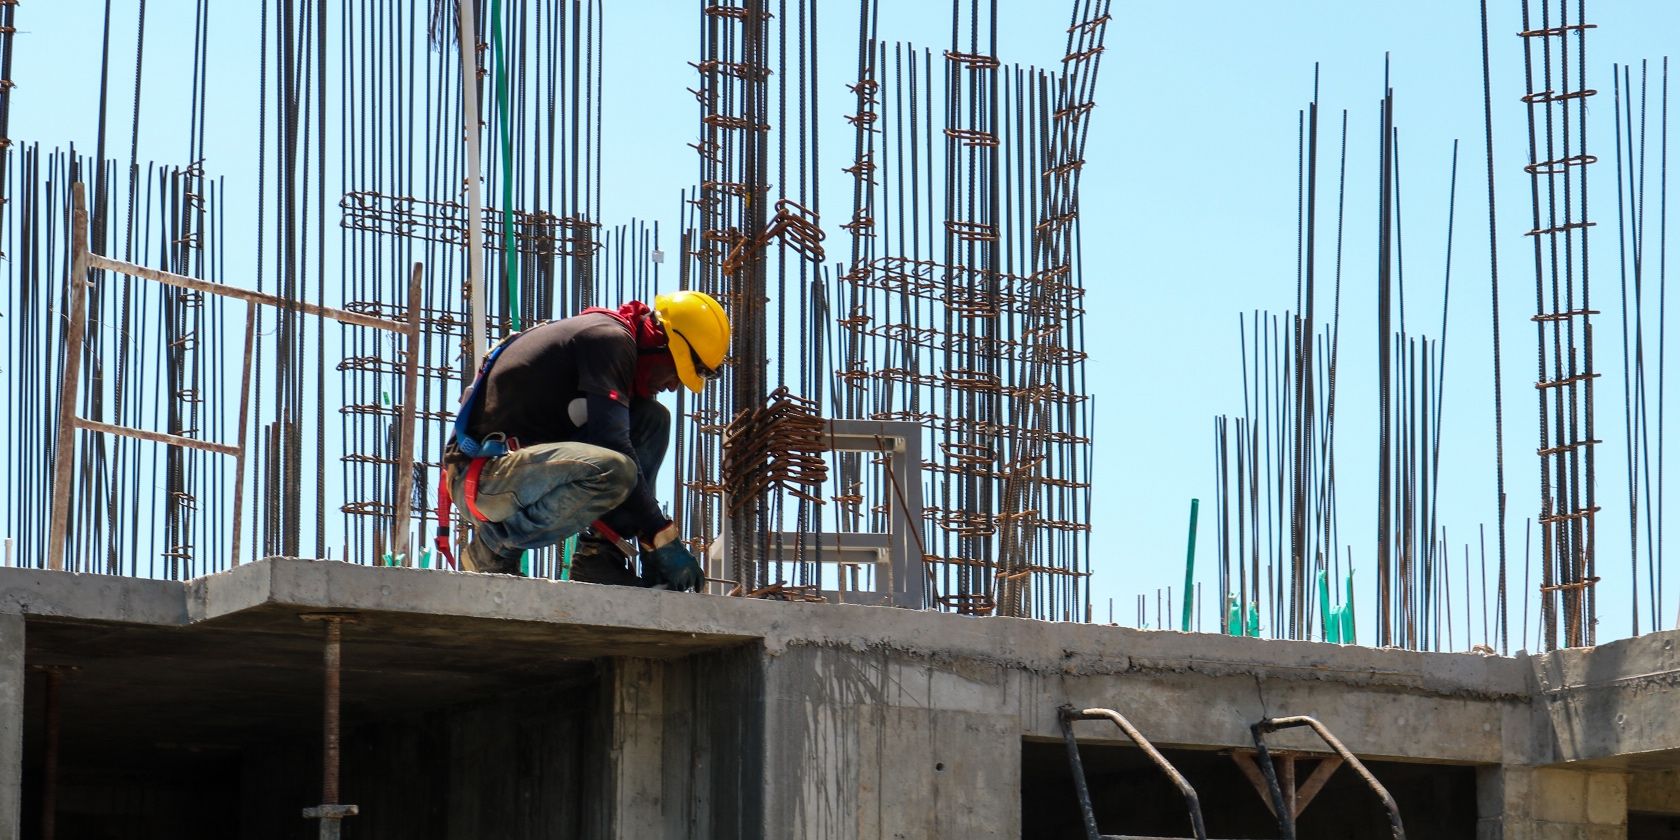 Photo of a person working on a constructio site 